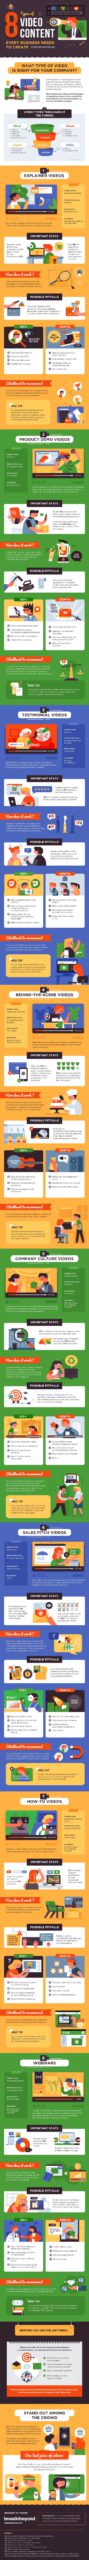 8 types of high performing video content to upgrade your marketing strategy infographic scaled 1